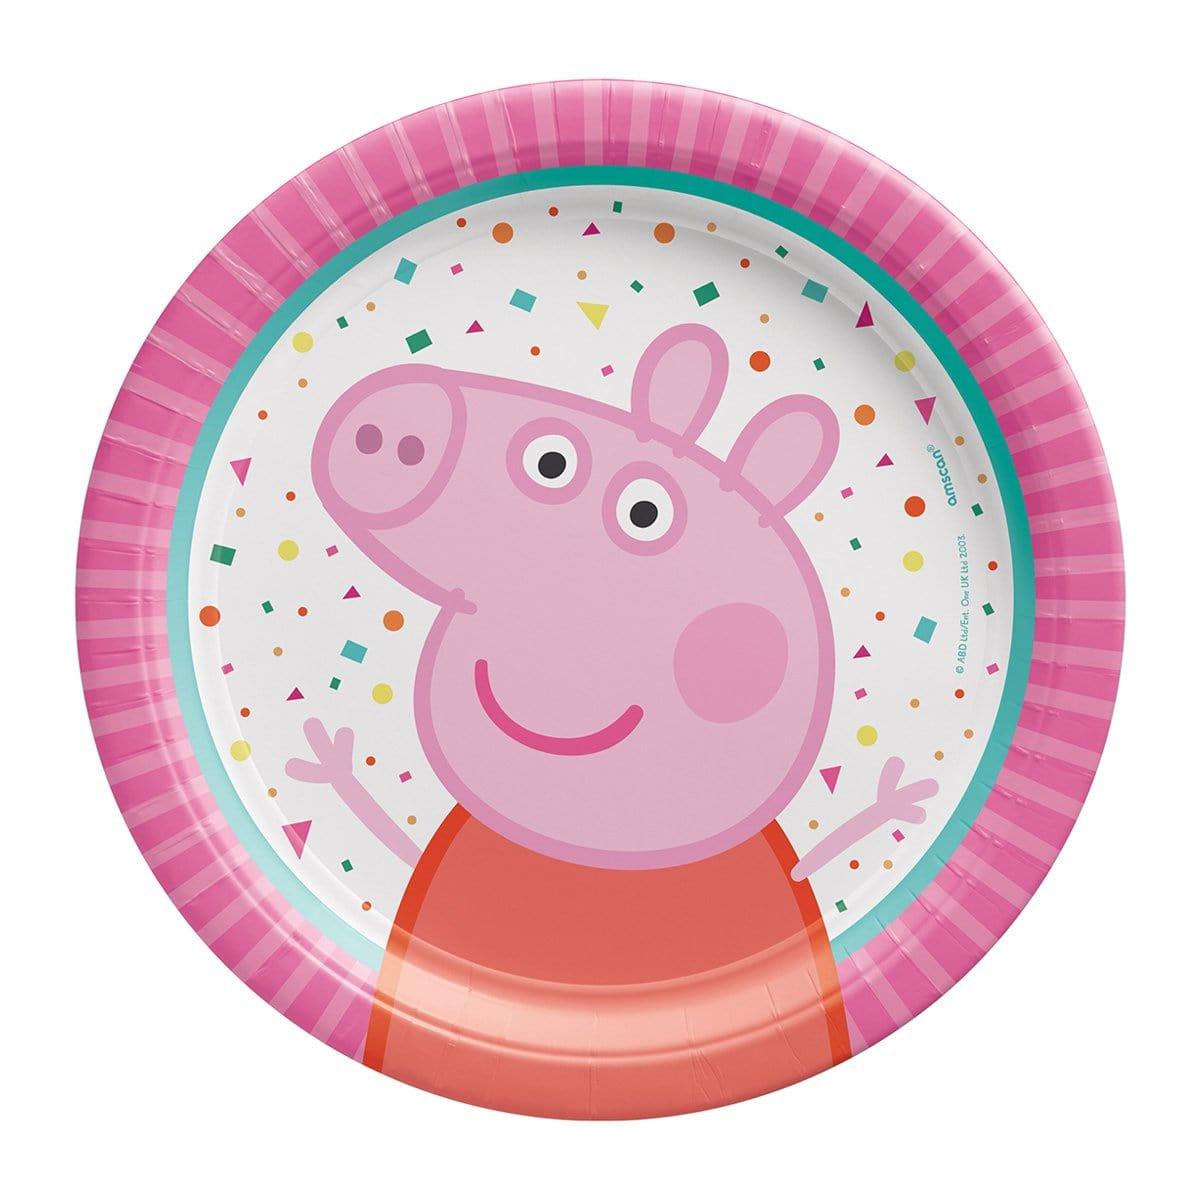 Buy Kids Birthday Peppa Pig Confetti Dessert Plates 7 Inches, 8 Counts sold at Party Expert